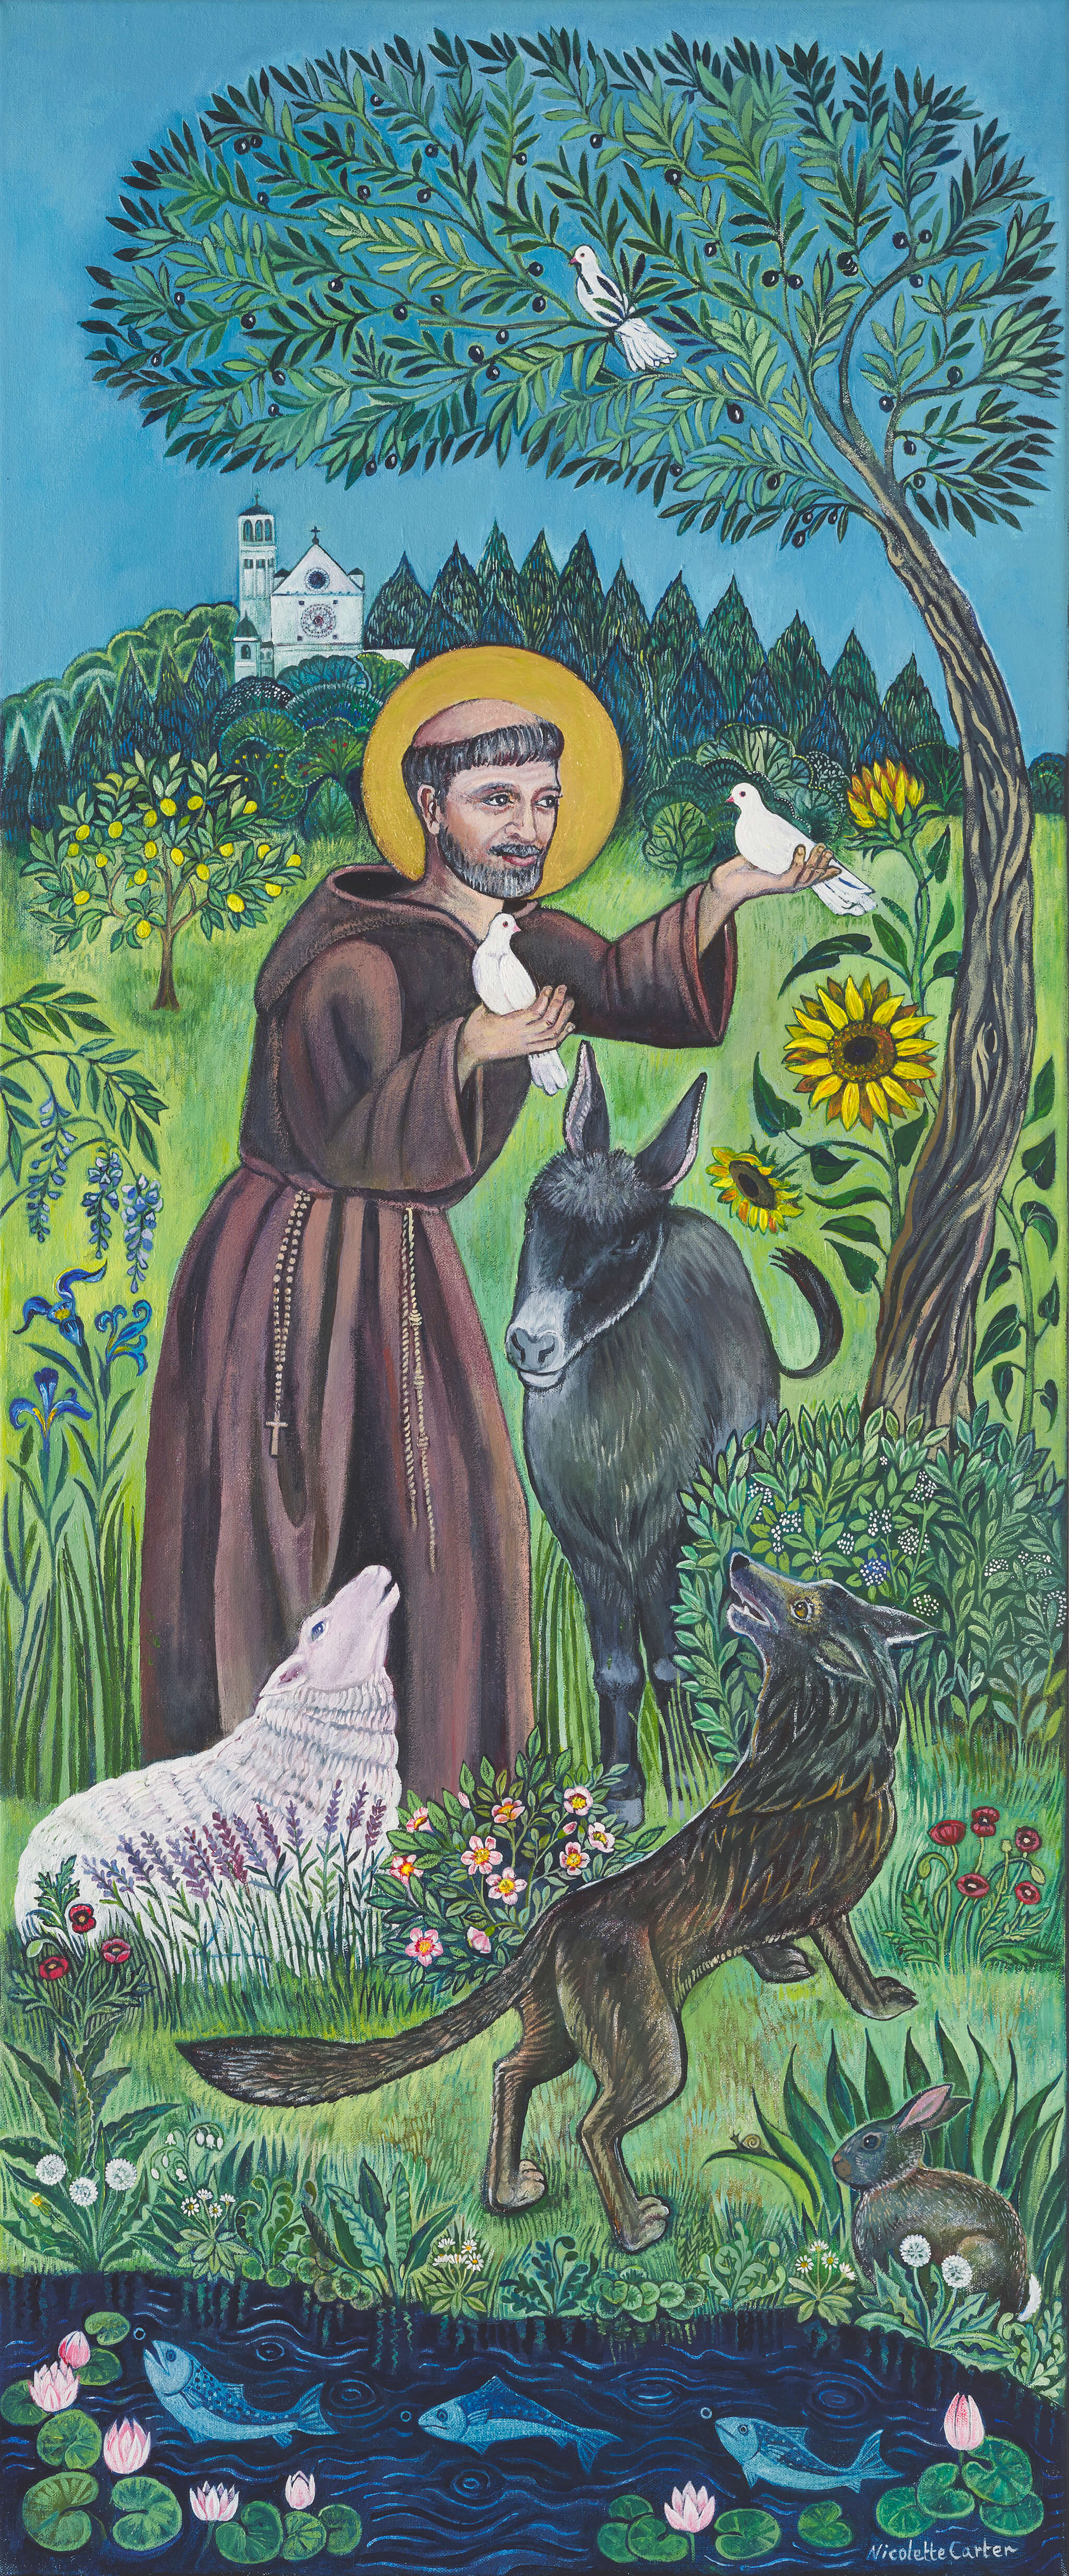 St. Francis by Nicolette Carter